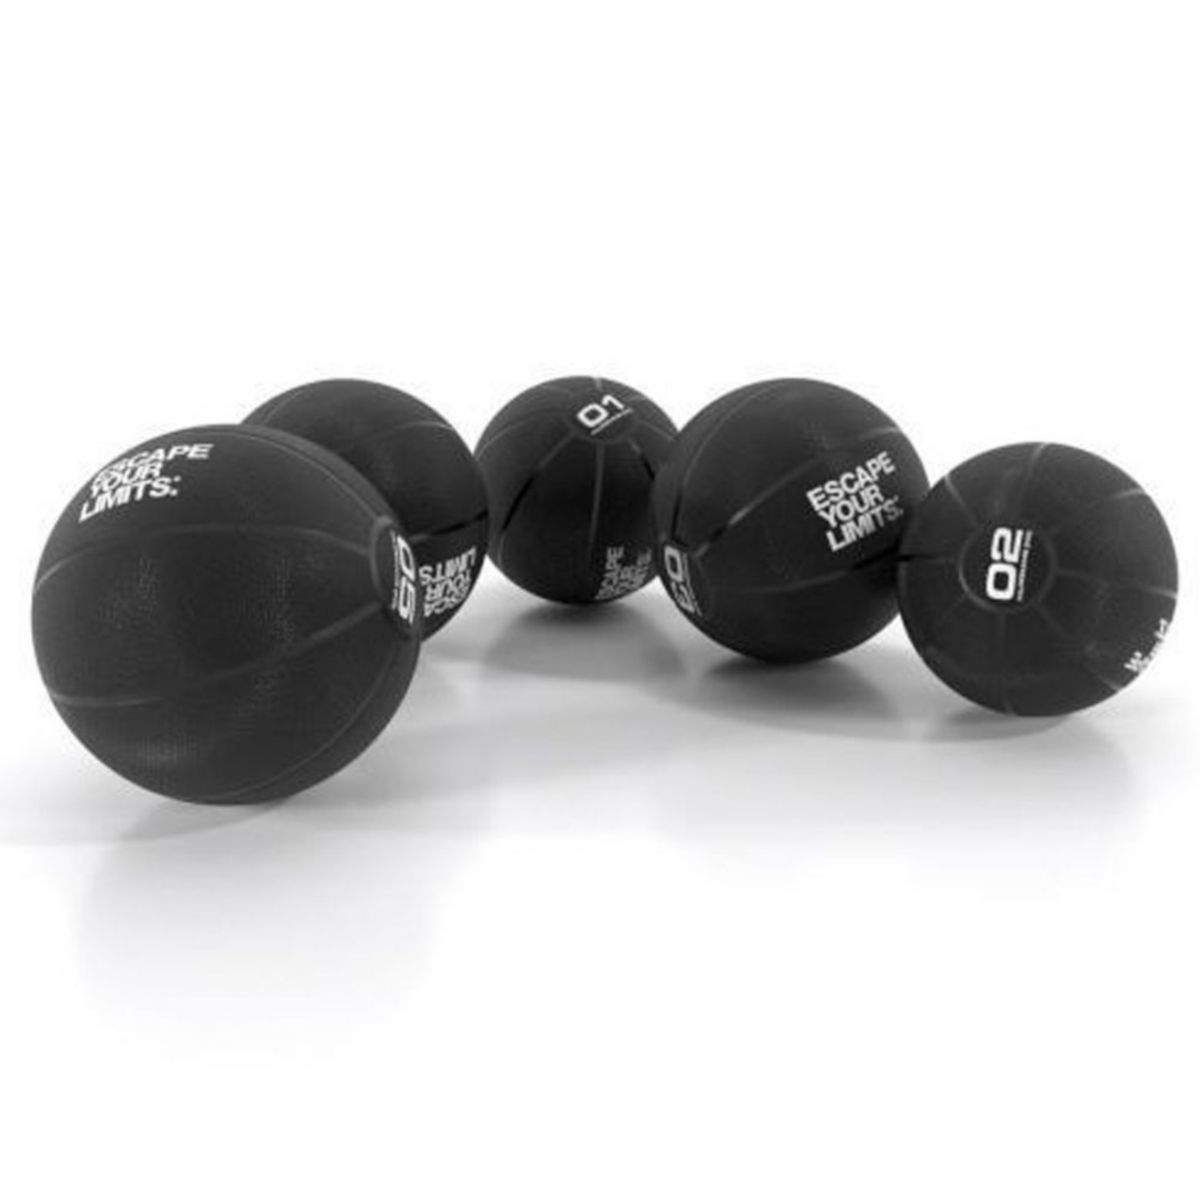 Escape Fitness Total Grip Strength Training Exercise Medicine Ball, 10 Pounds Escape Fitness